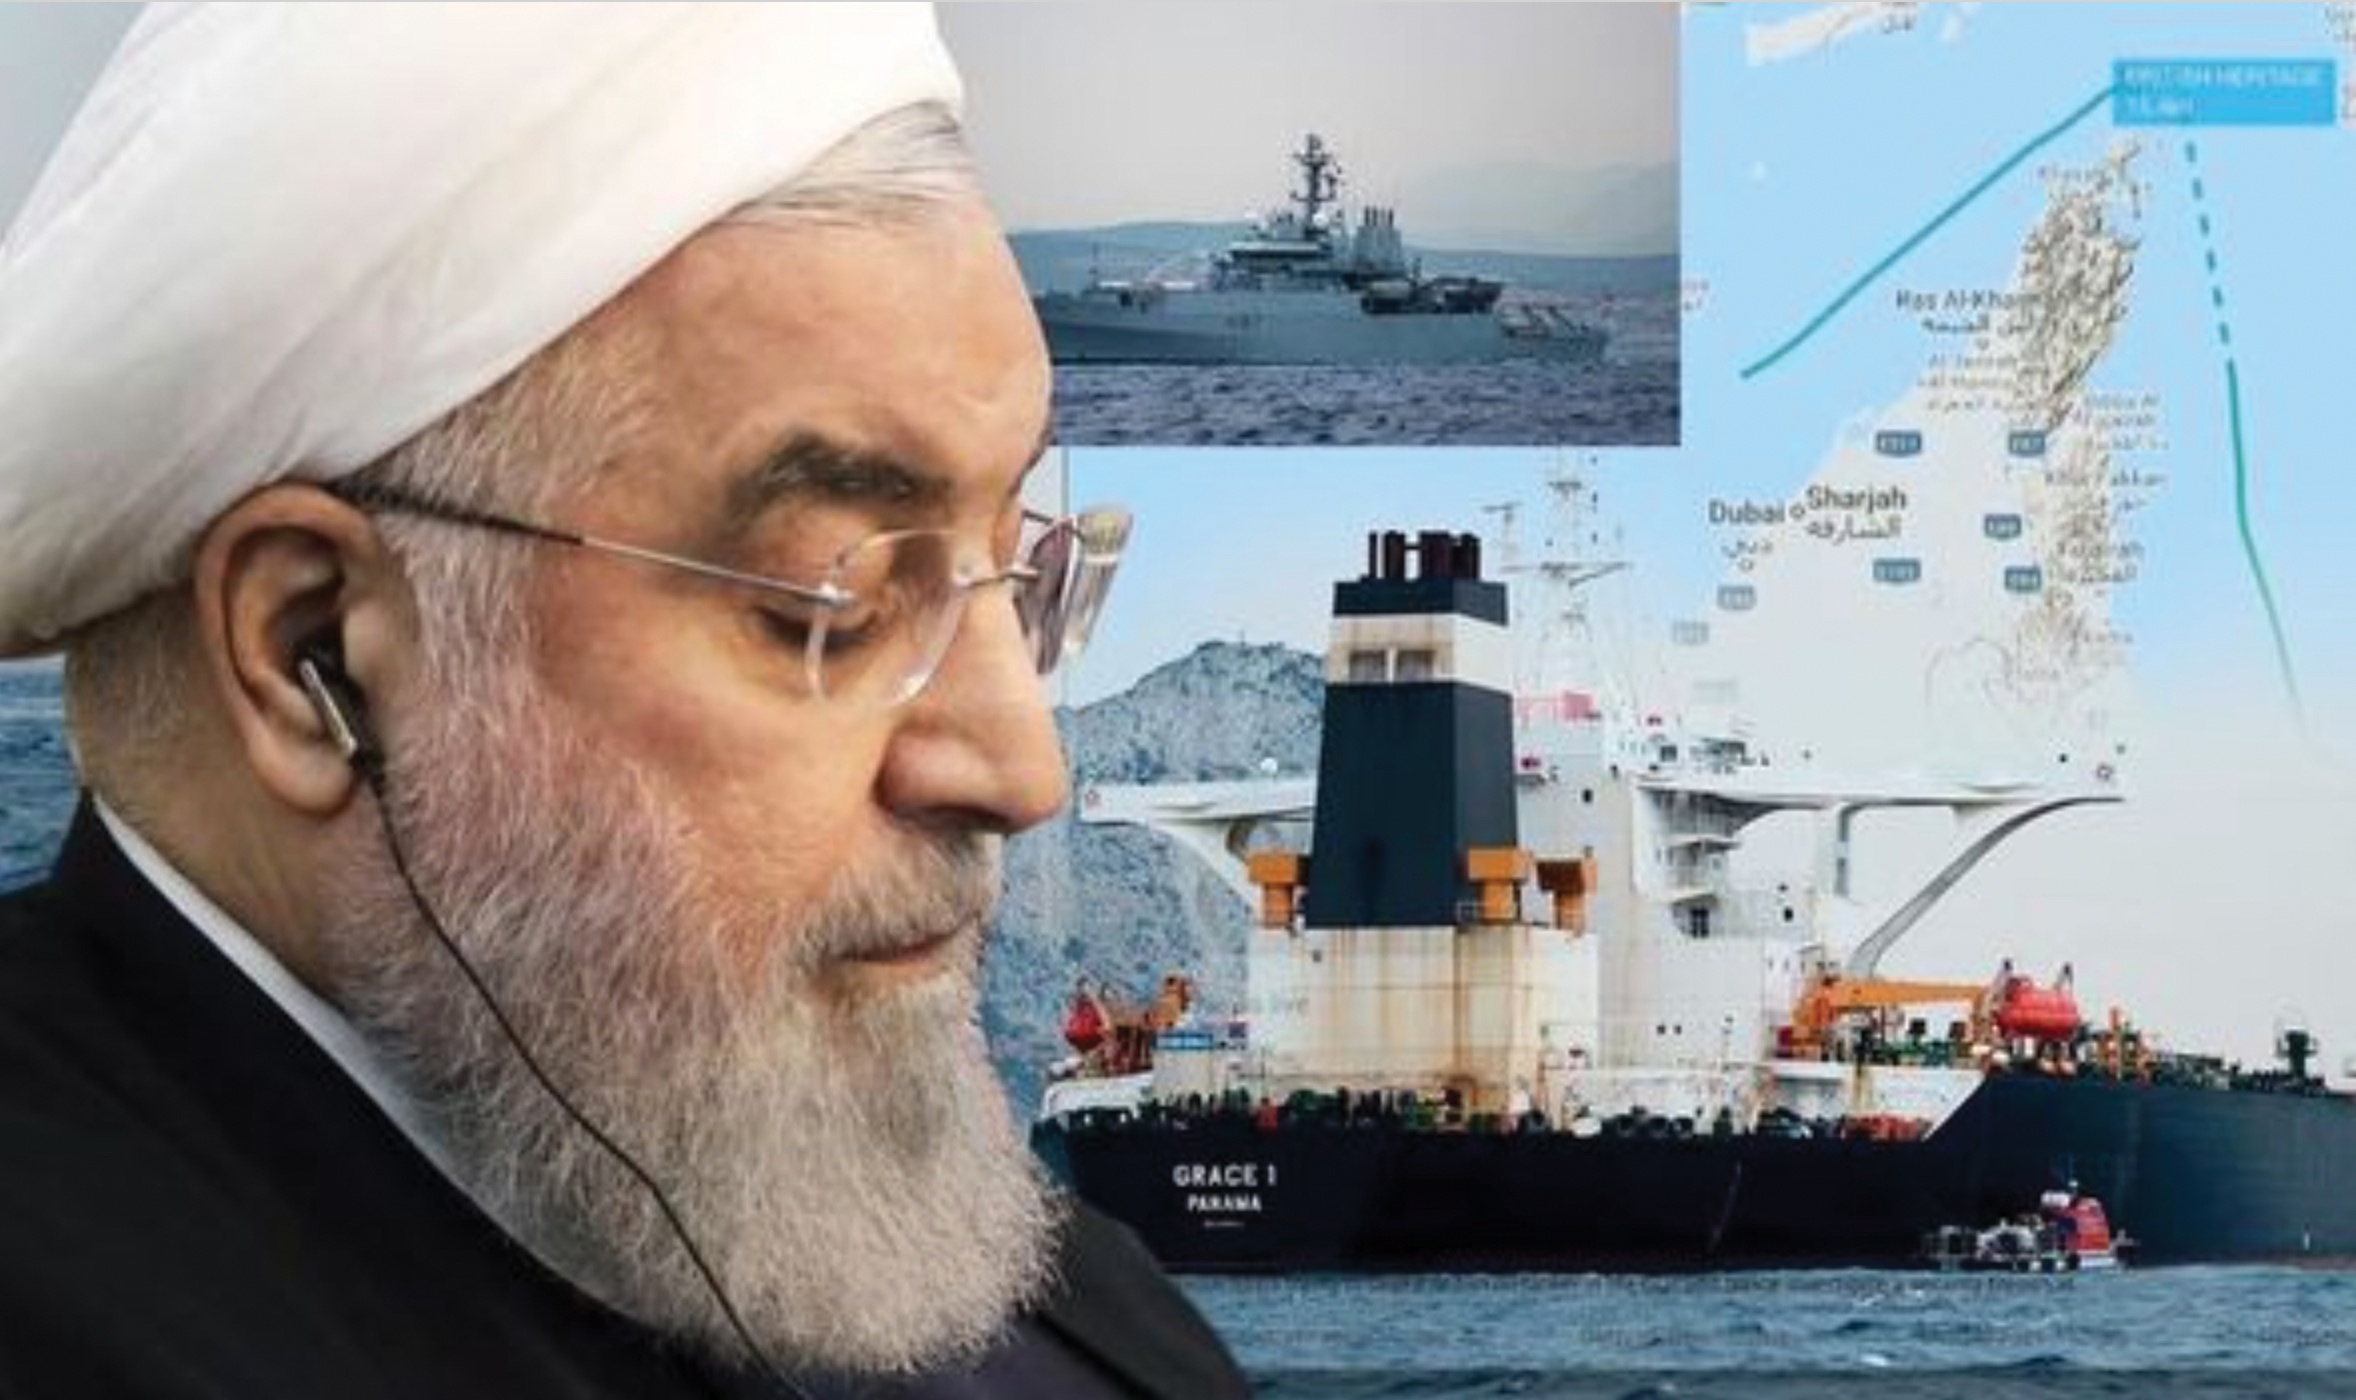 President Rouhani of Iran presides over the tanker crisis